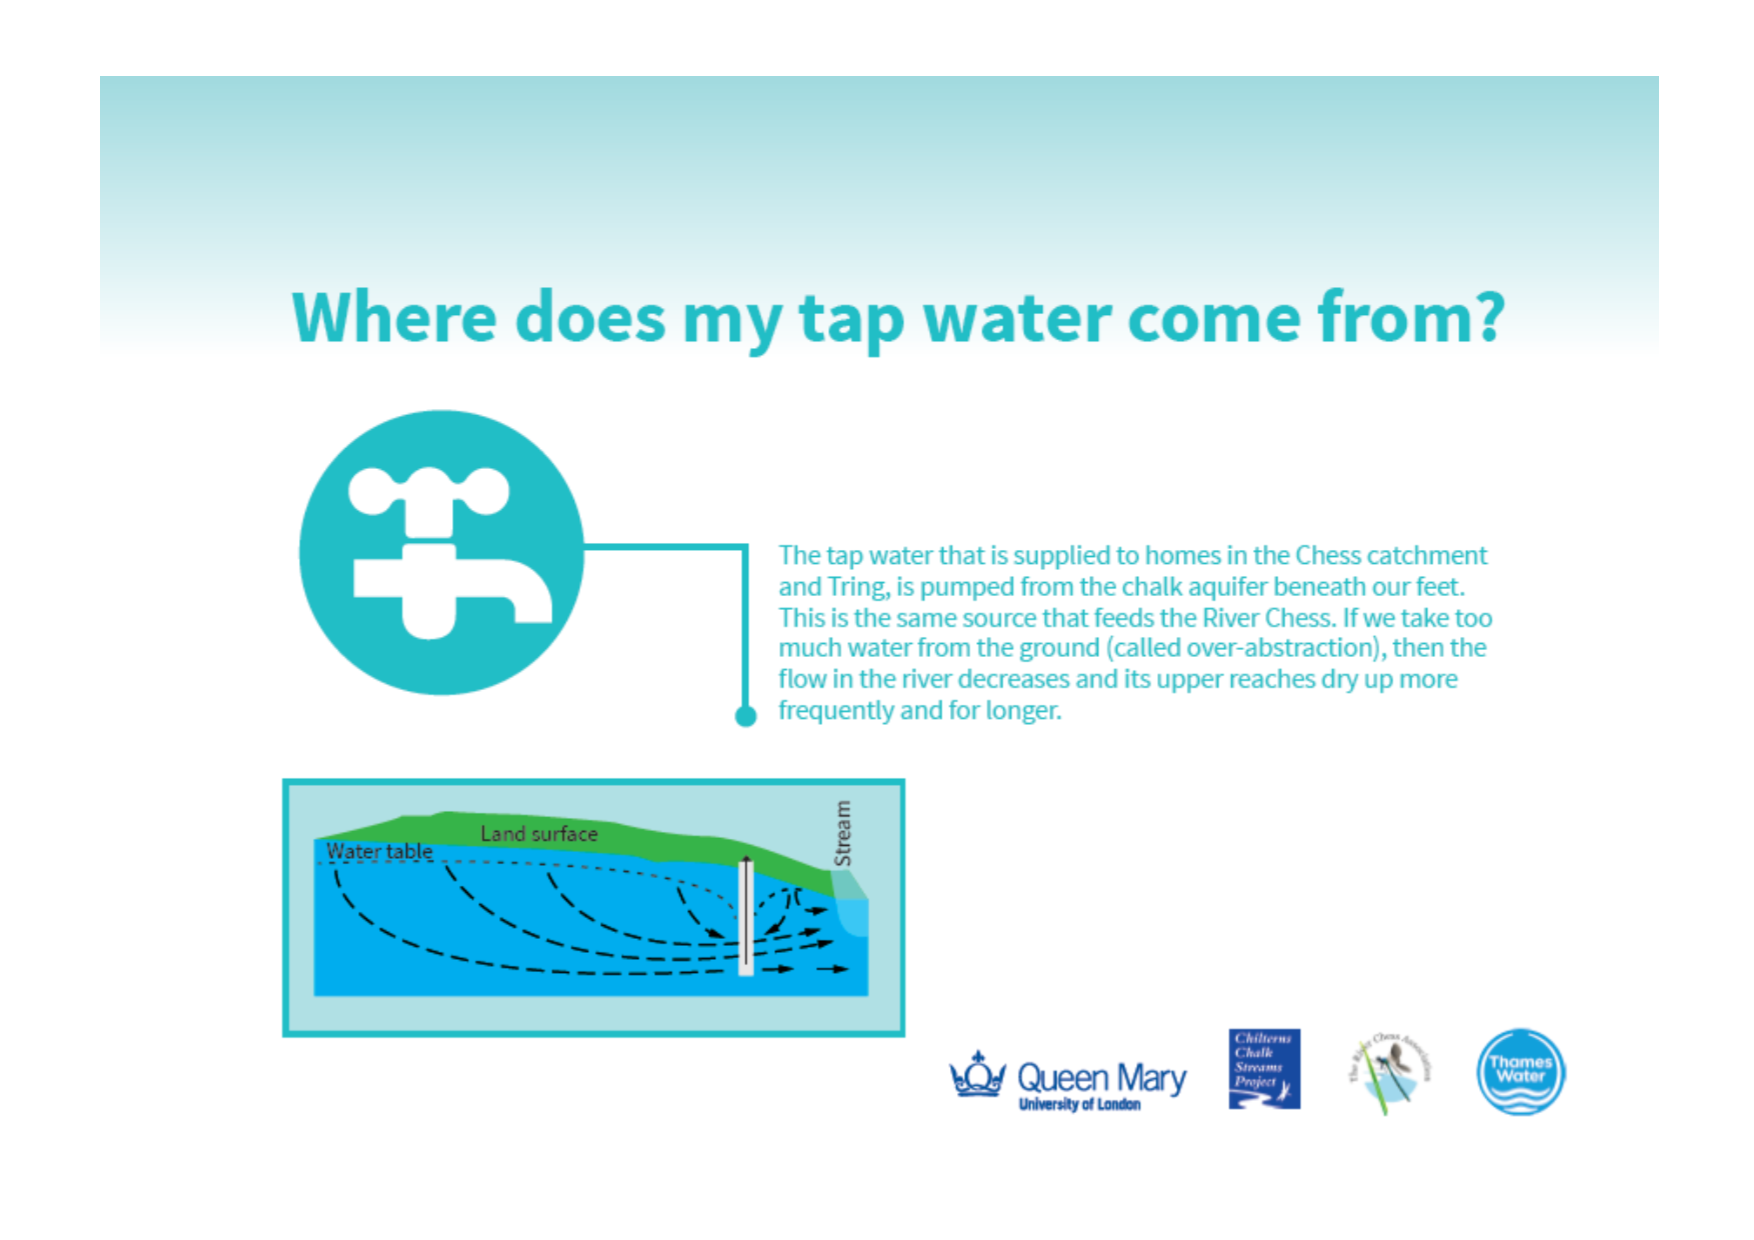 Thumbnail for an educational poster explaining how tap water can be supplied from a chalk aquifer.